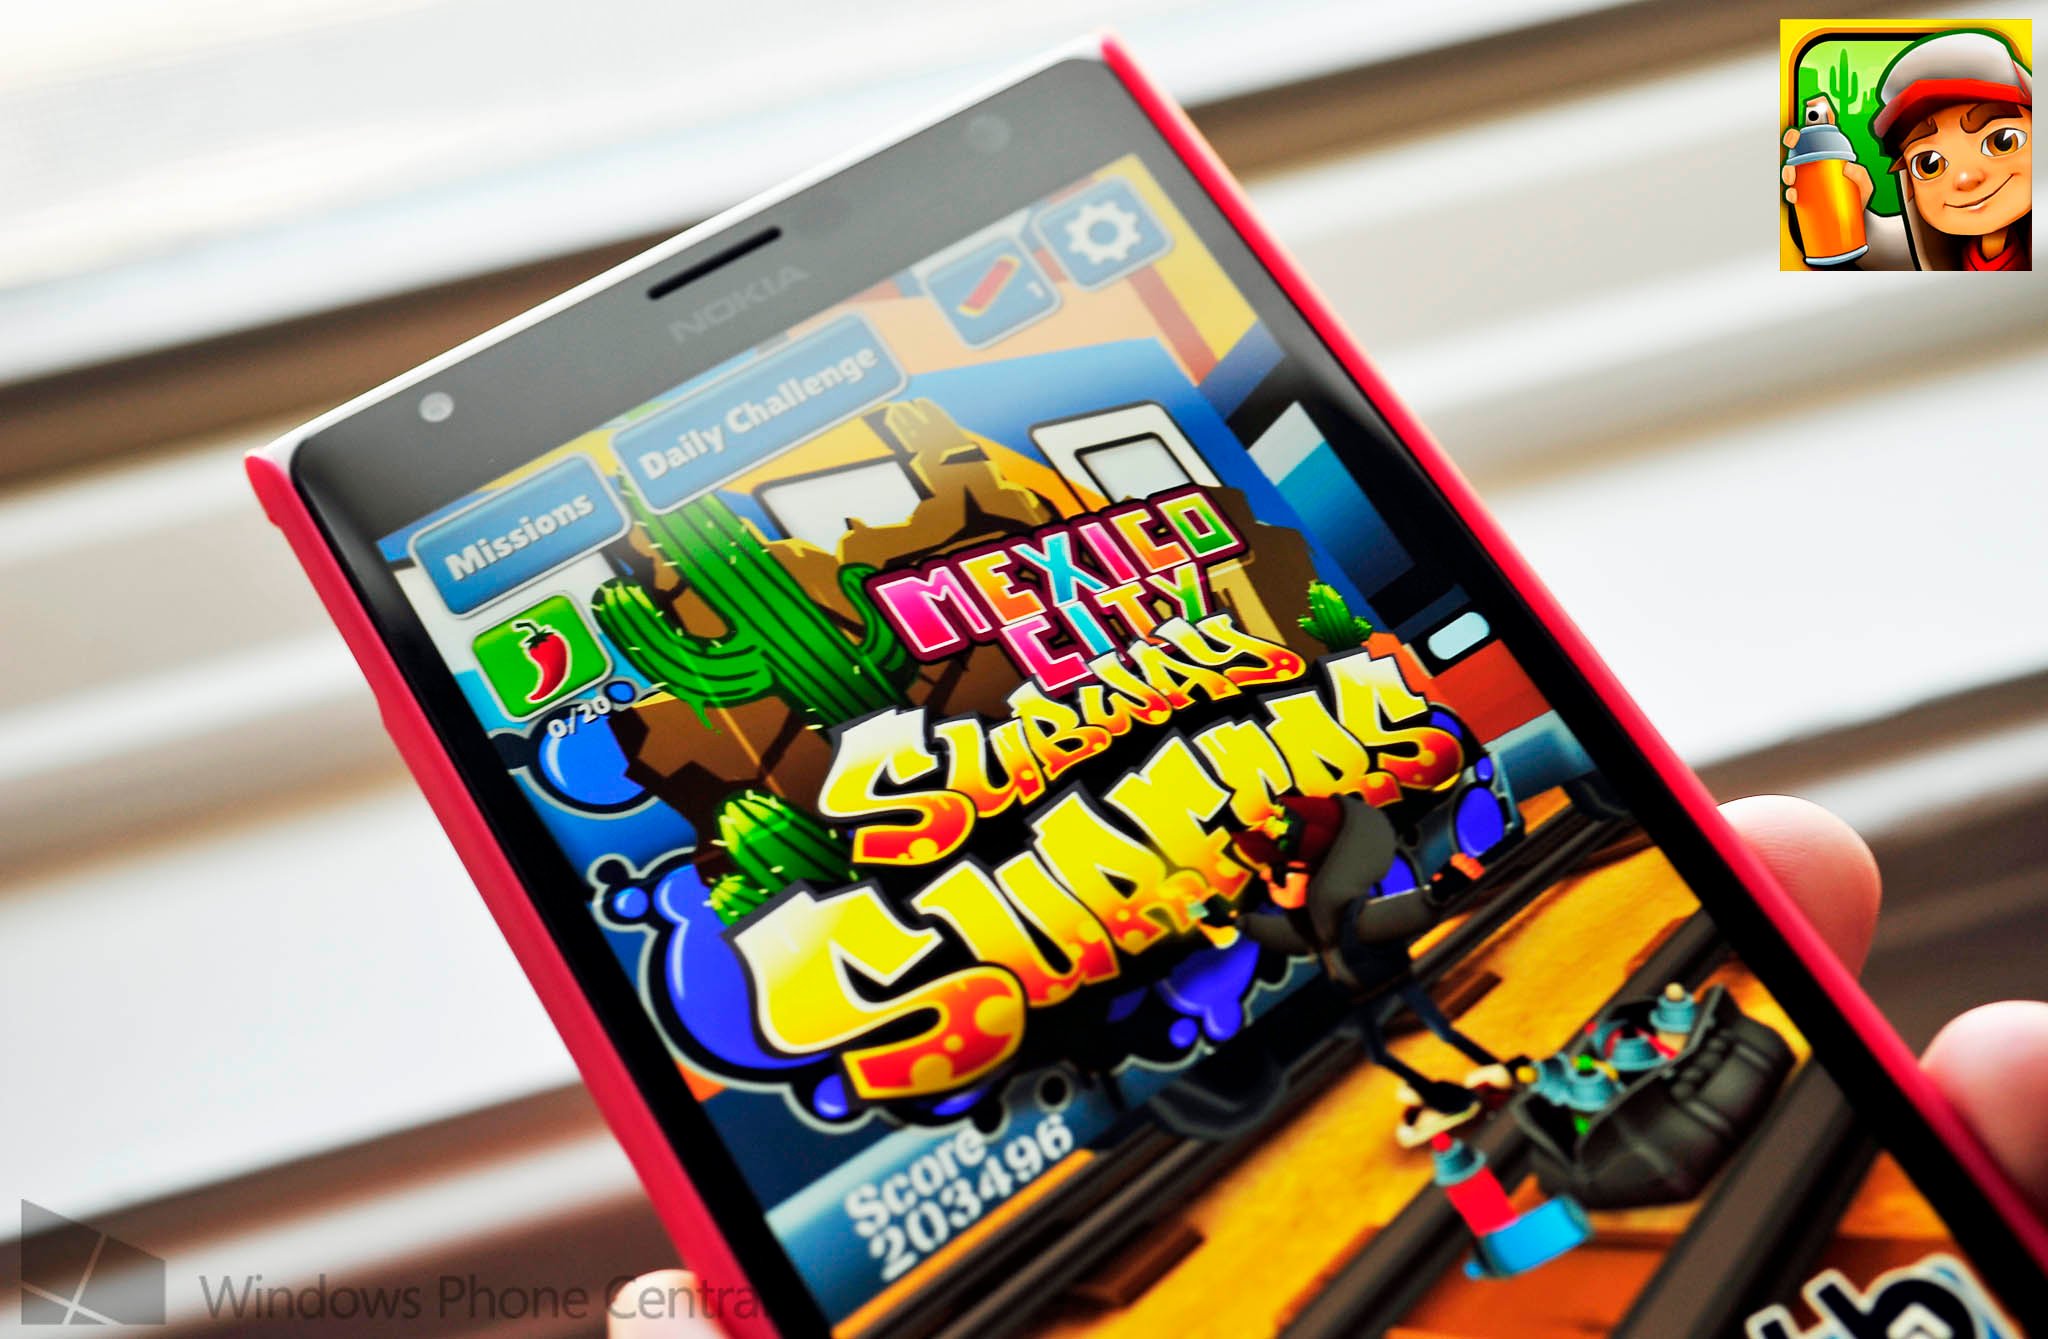 Subway Surfers for Windows Phone, Android and iOS Adds World Tour